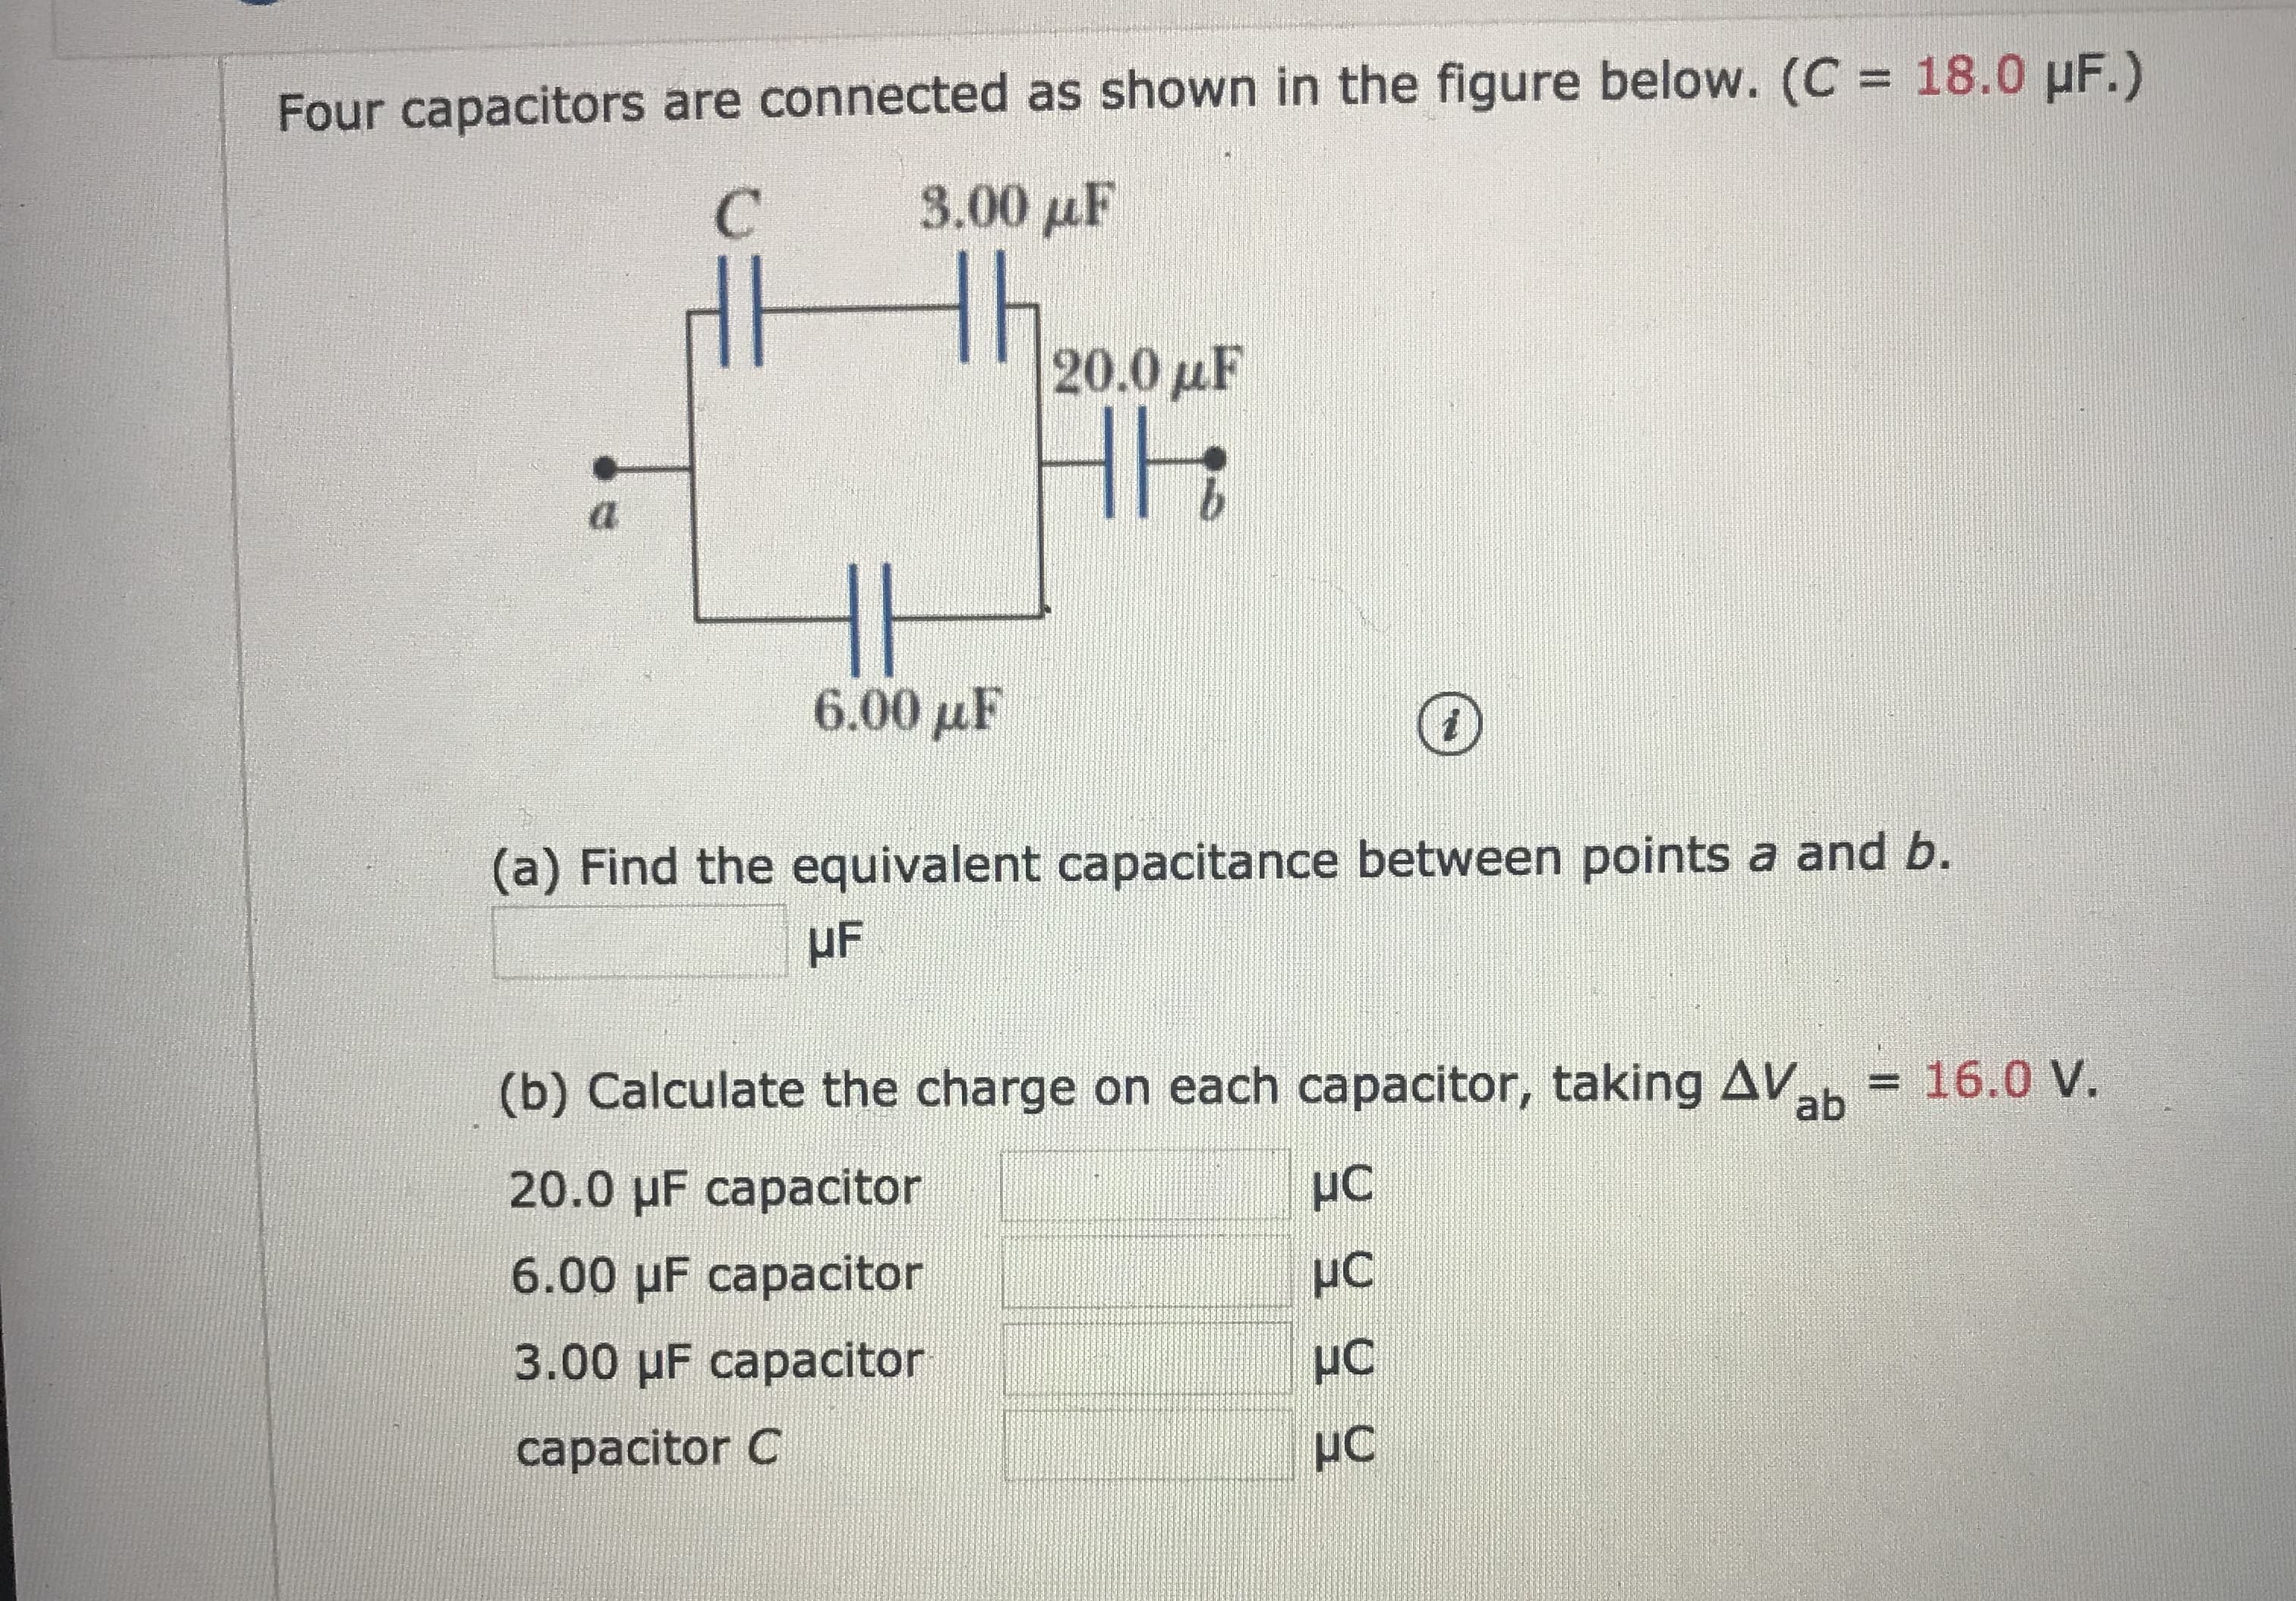 Four capacitors are connected as shown in the figure below. (C 18.0 HF.)
3.00 μF
C
Hh.
HH
|20.0 uF
a
6.00uF
(a) Find the equivalent capacitance between points a and b.
HF
16.0 V.
(b) Calculate the charge on each capacitor, taking AV
ab
20.0 HF capacitor
6.00 HF capacitor
3.00 uF capacitor
HC
capacitor C
